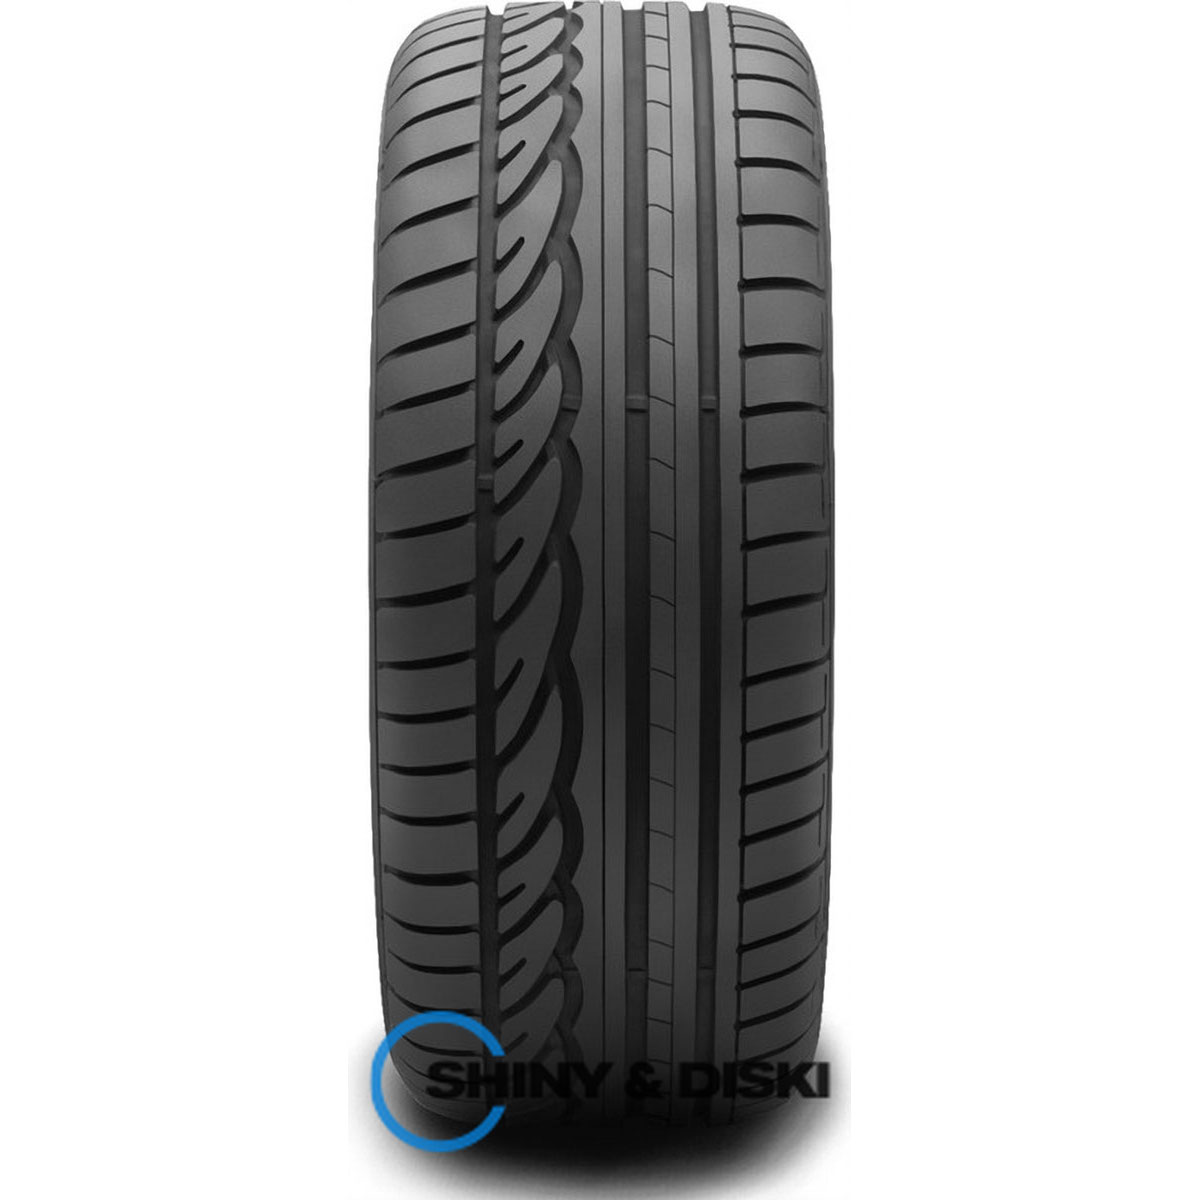 резина dunlop sp sport 01 a/s 225/50 r17 91v